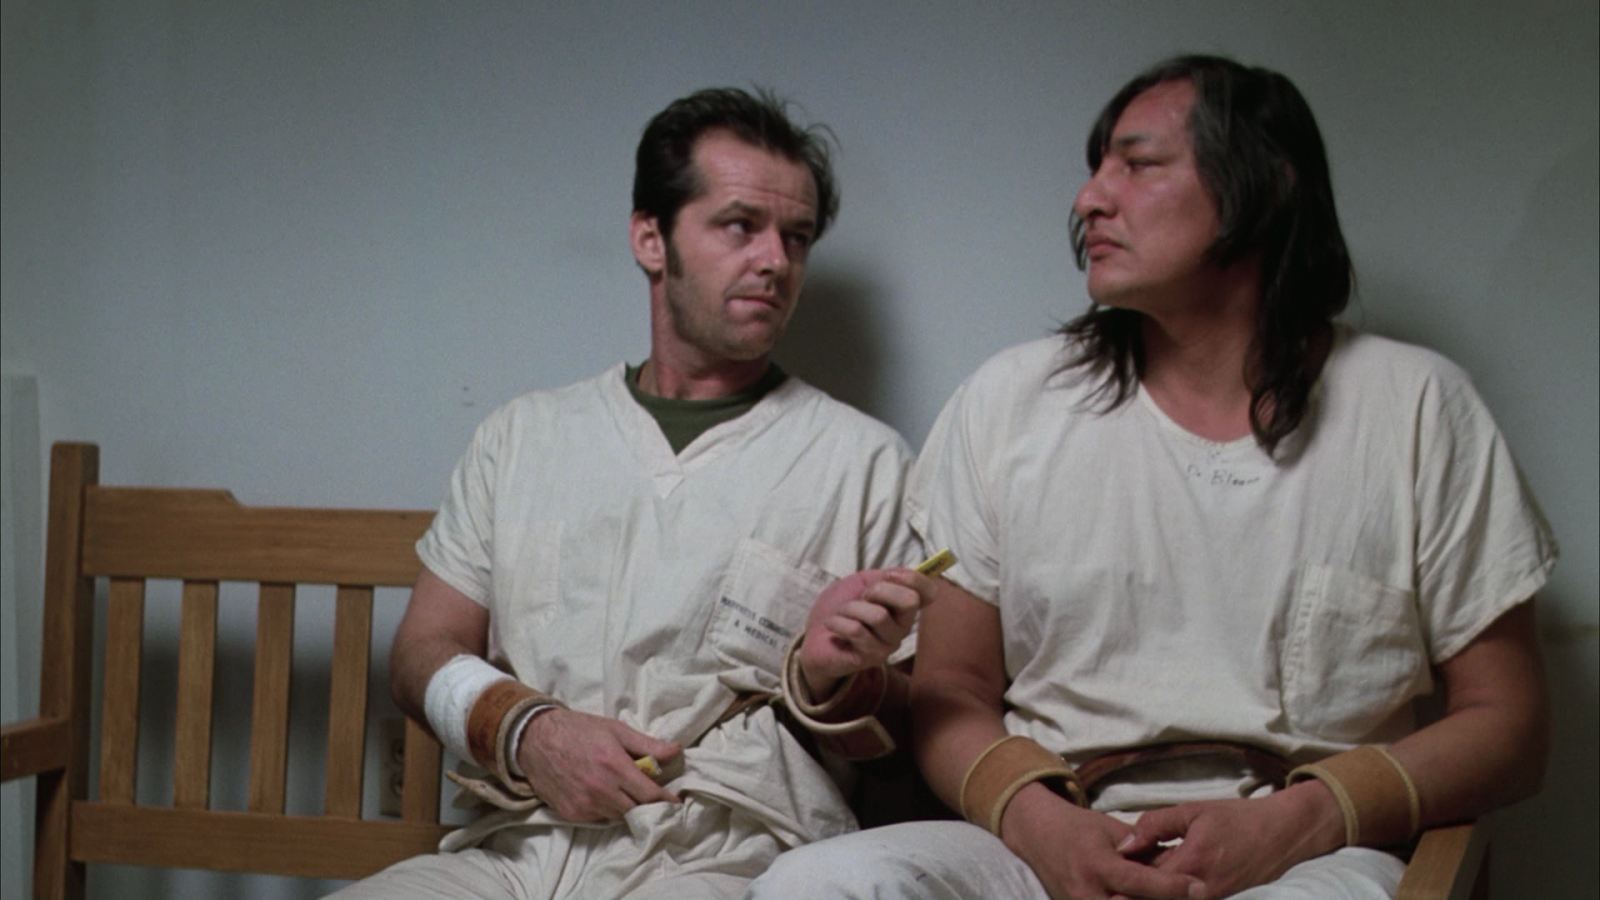 The One Movie Blog: One Flew Over the Cuckoo's Nest (1975) Analysis